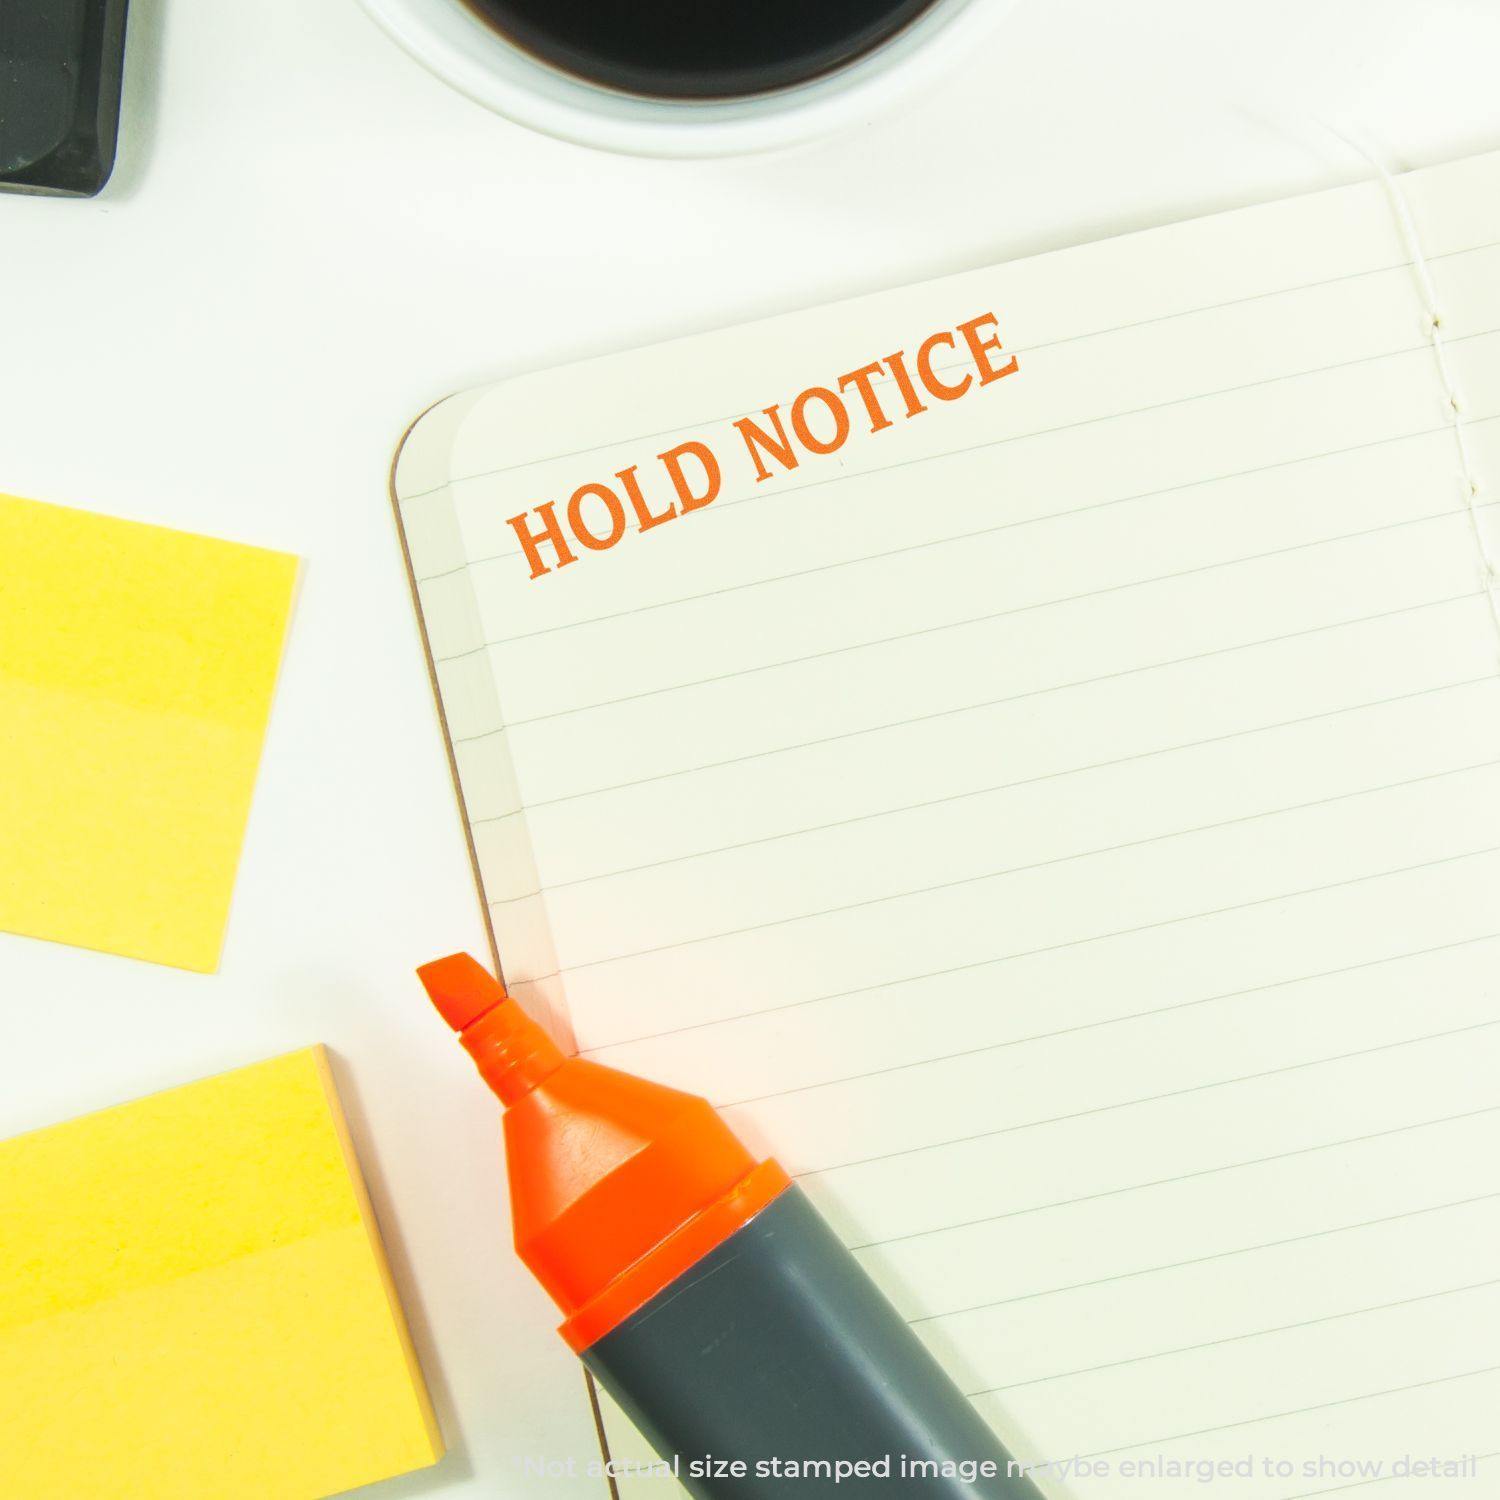 A self-inking stamp with a stamped image showing how the text "HOLD NOTICE" in a large bold font is displayed by it.